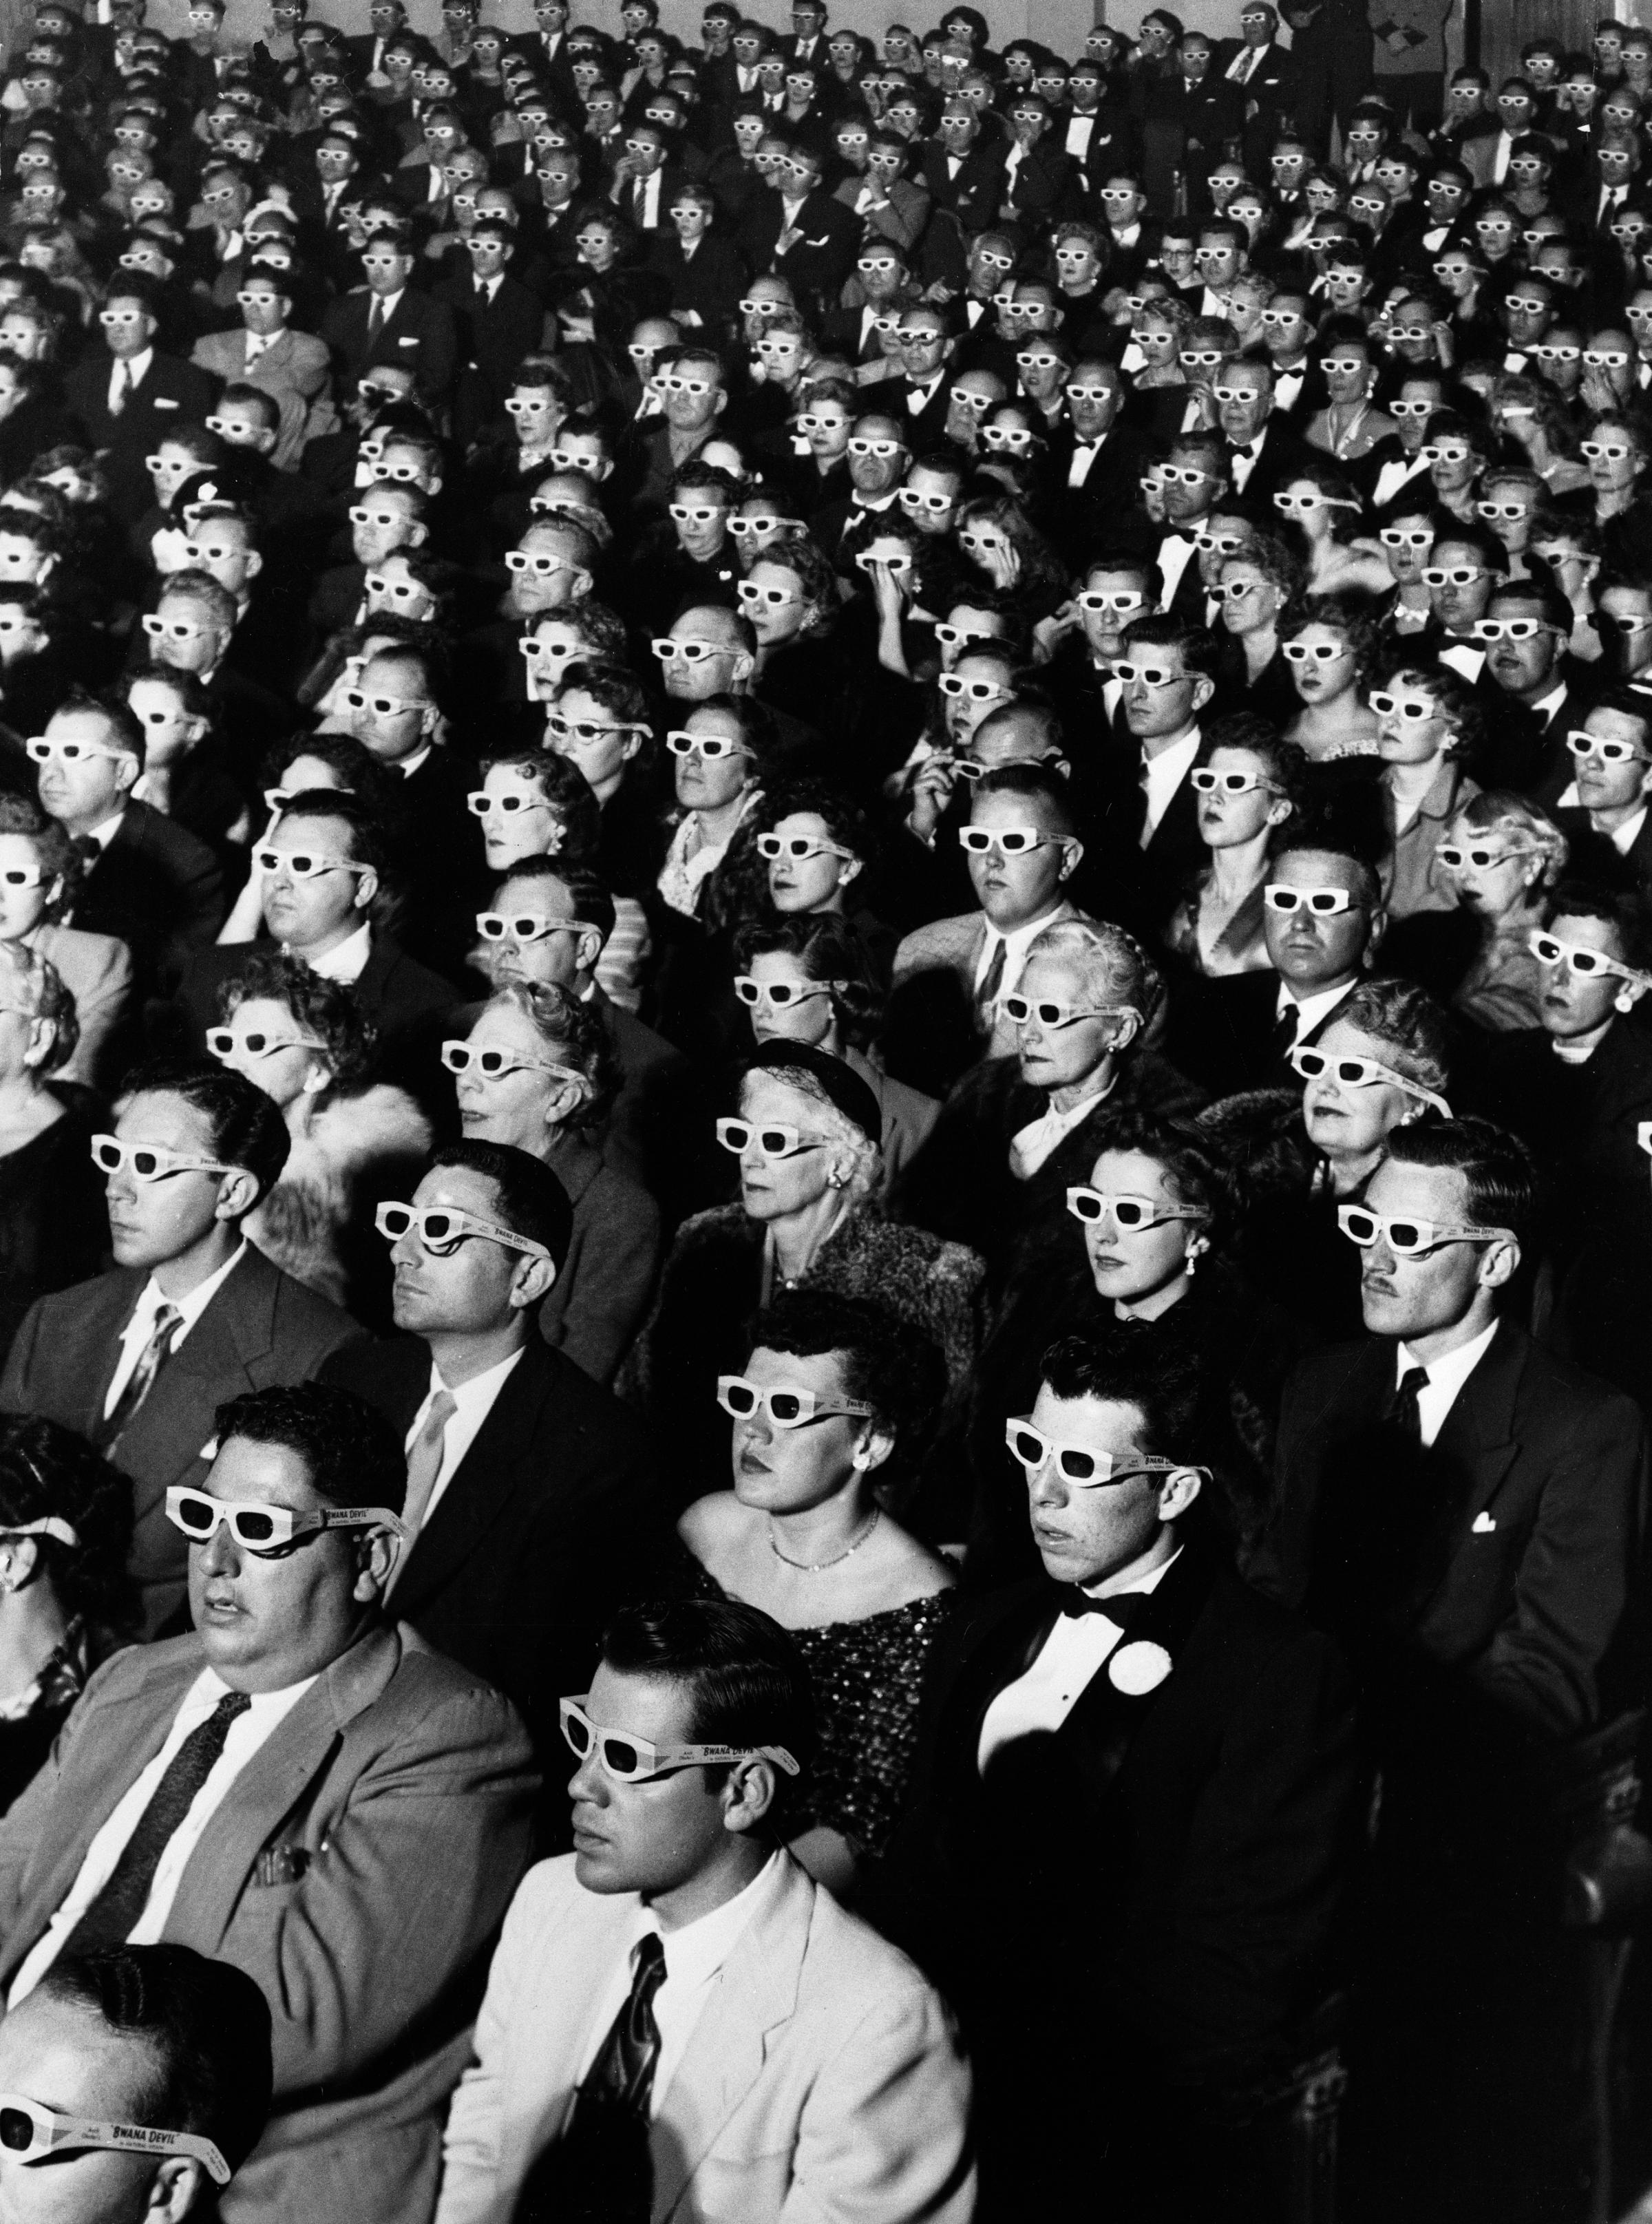 The opening-night screening of Bwana Devil, the first full-length, color 3-D movie, Nov. 26, 1952, at the Paramount Theater in Hollywood.